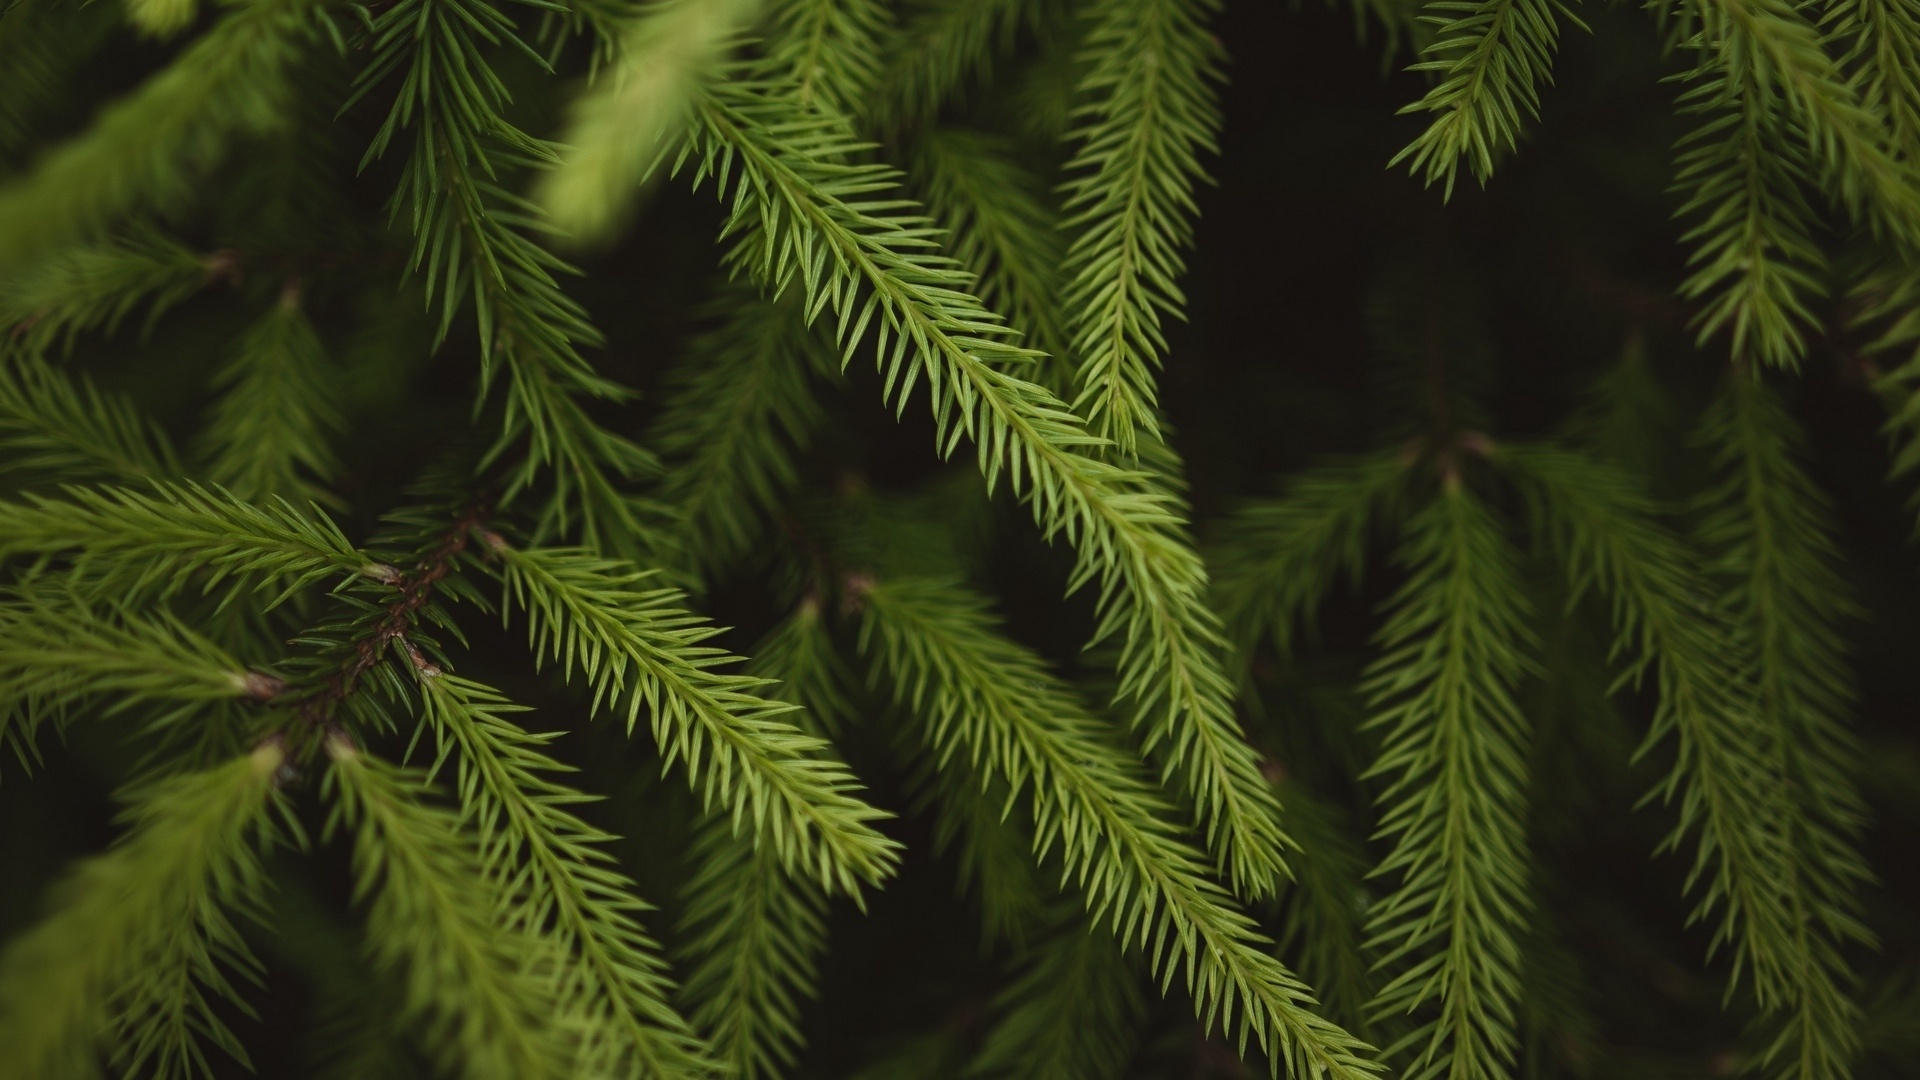 Close-up of spruce branches, Detailed textures, Nature's elegance, Branch formation, 1920x1080 Full HD Desktop